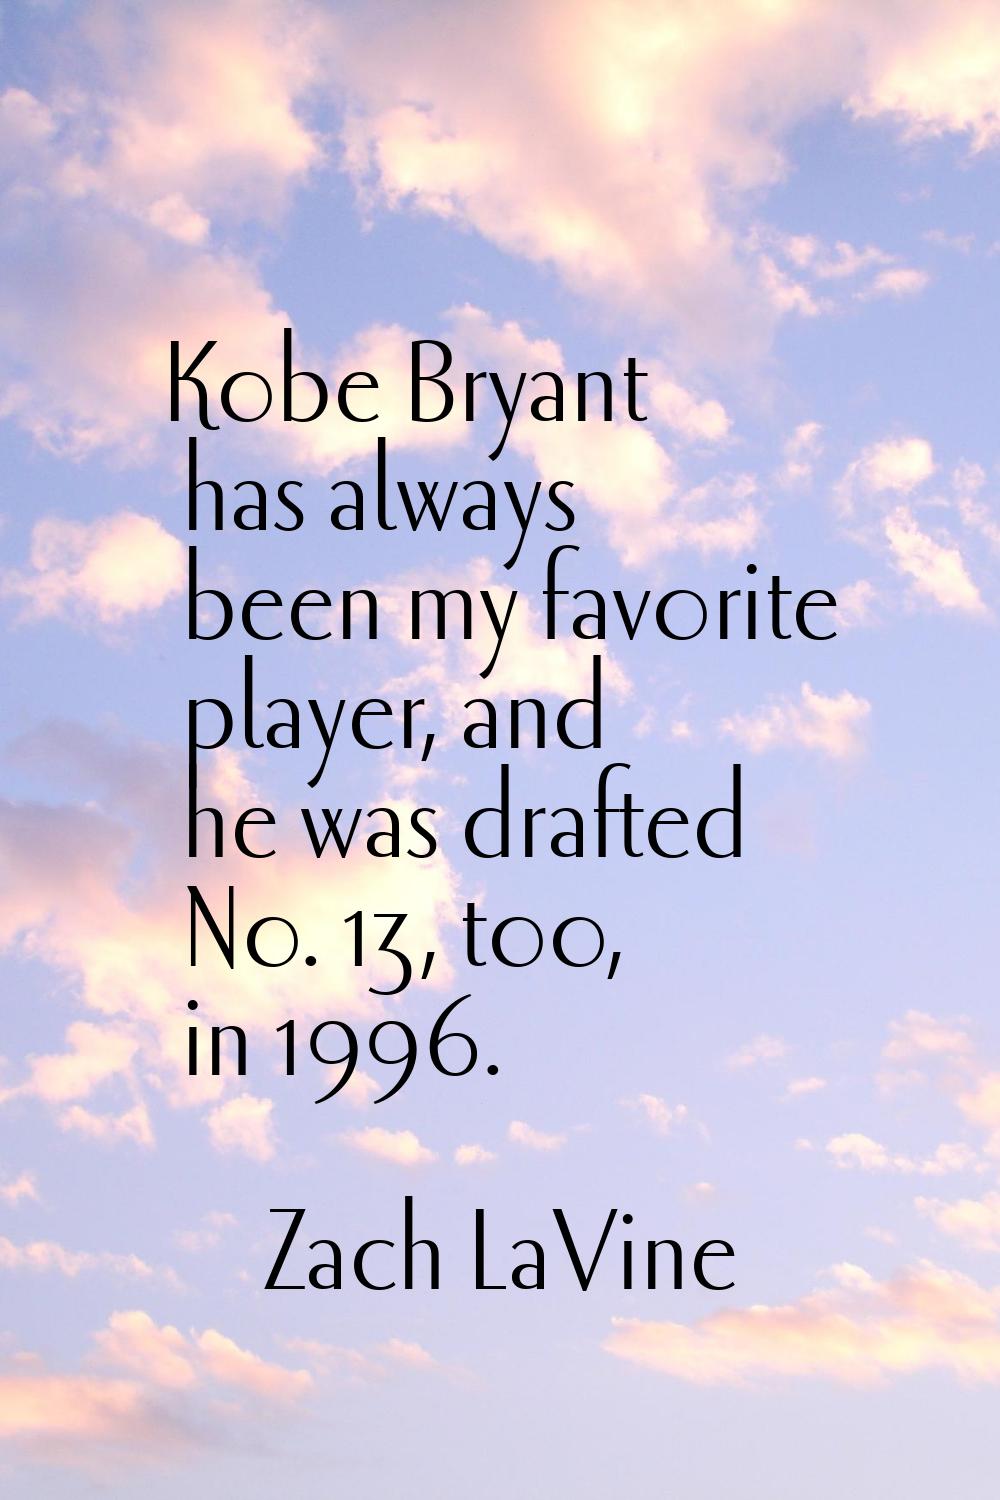 Kobe Bryant has always been my favorite player, and he was drafted No. 13, too, in 1996.